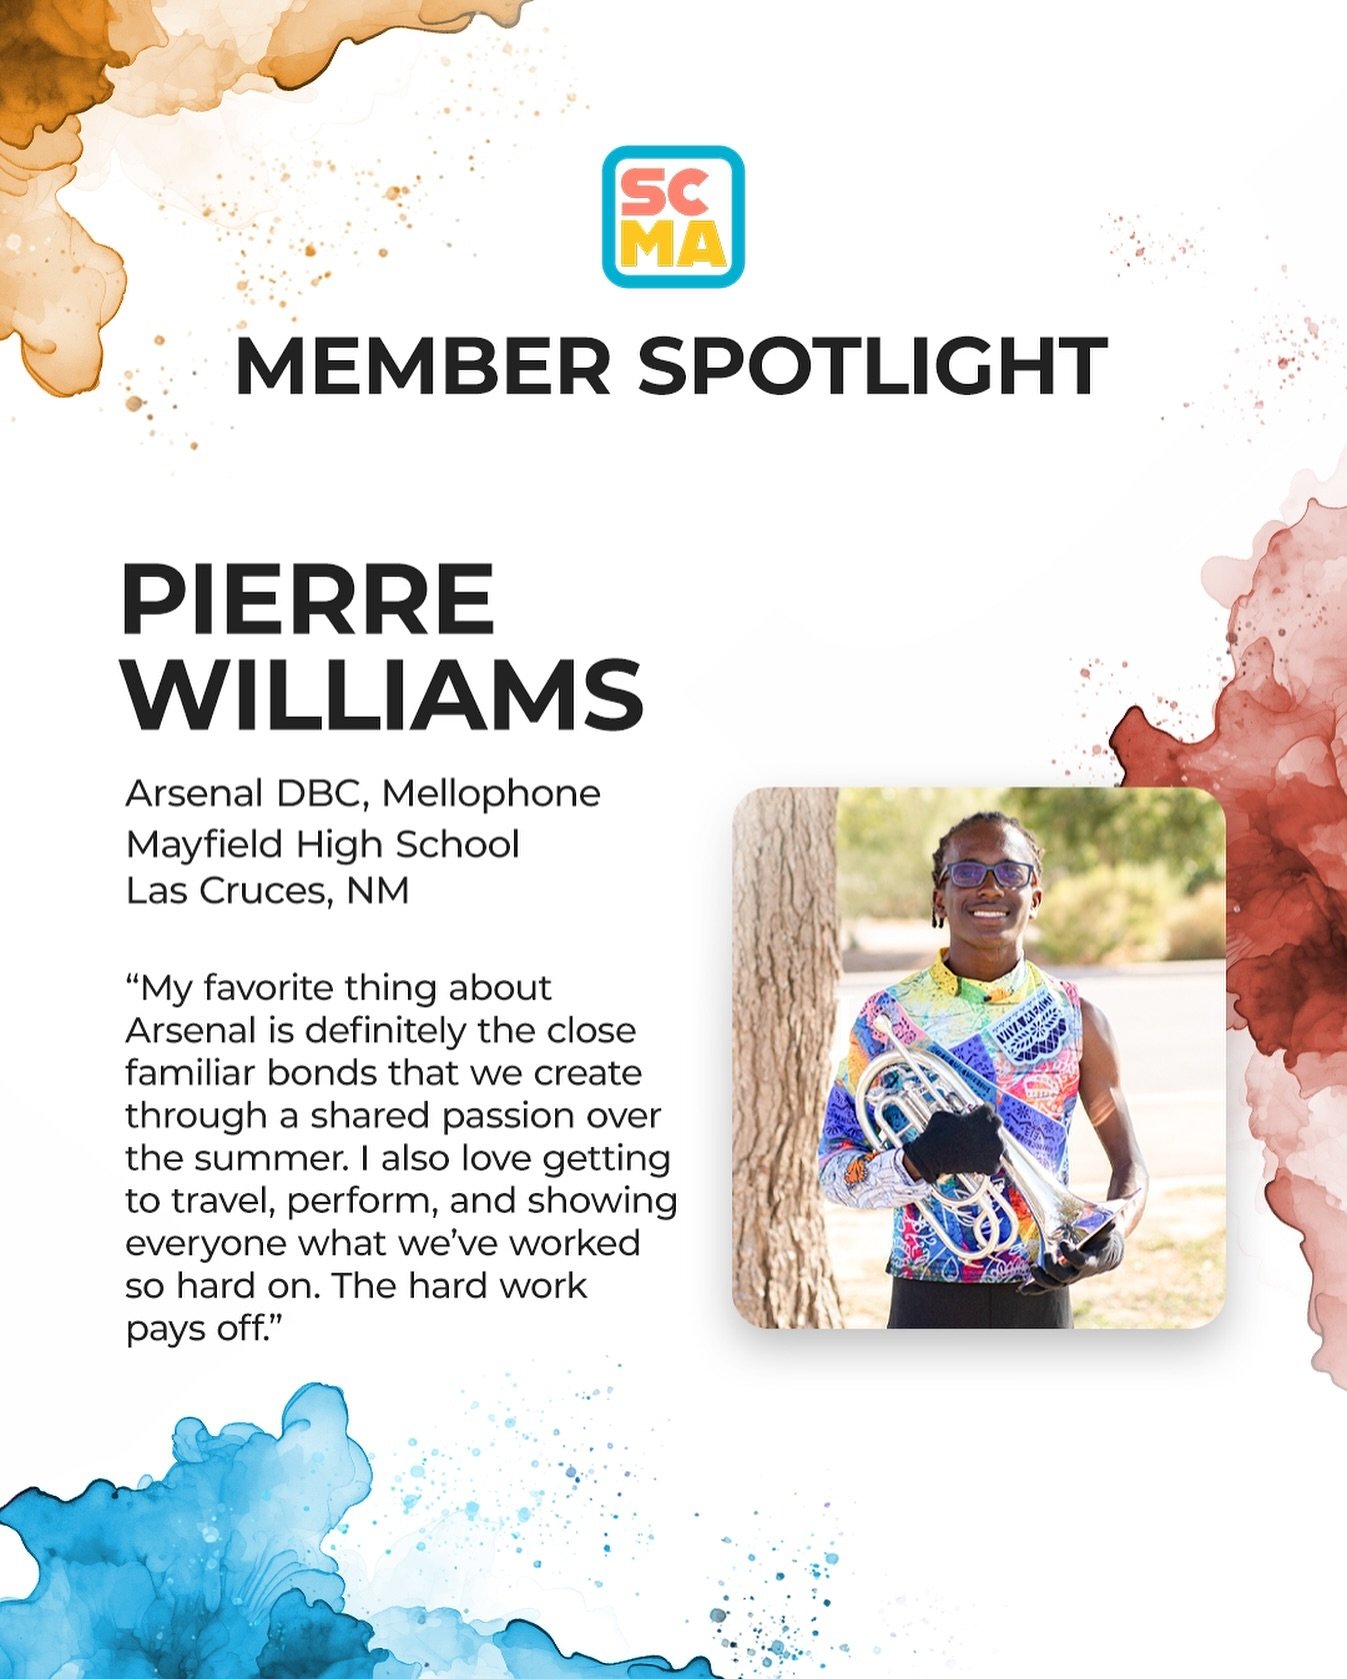 Meet Pierre Williams from Arsenal! Pierre is a veteran member and will be marching Arsenal again this summer. Hear what keeps him coming back! 

#suncitymusicalarts #nonprofit #music #marchingband #arsenaldbc #dci #drumcorps